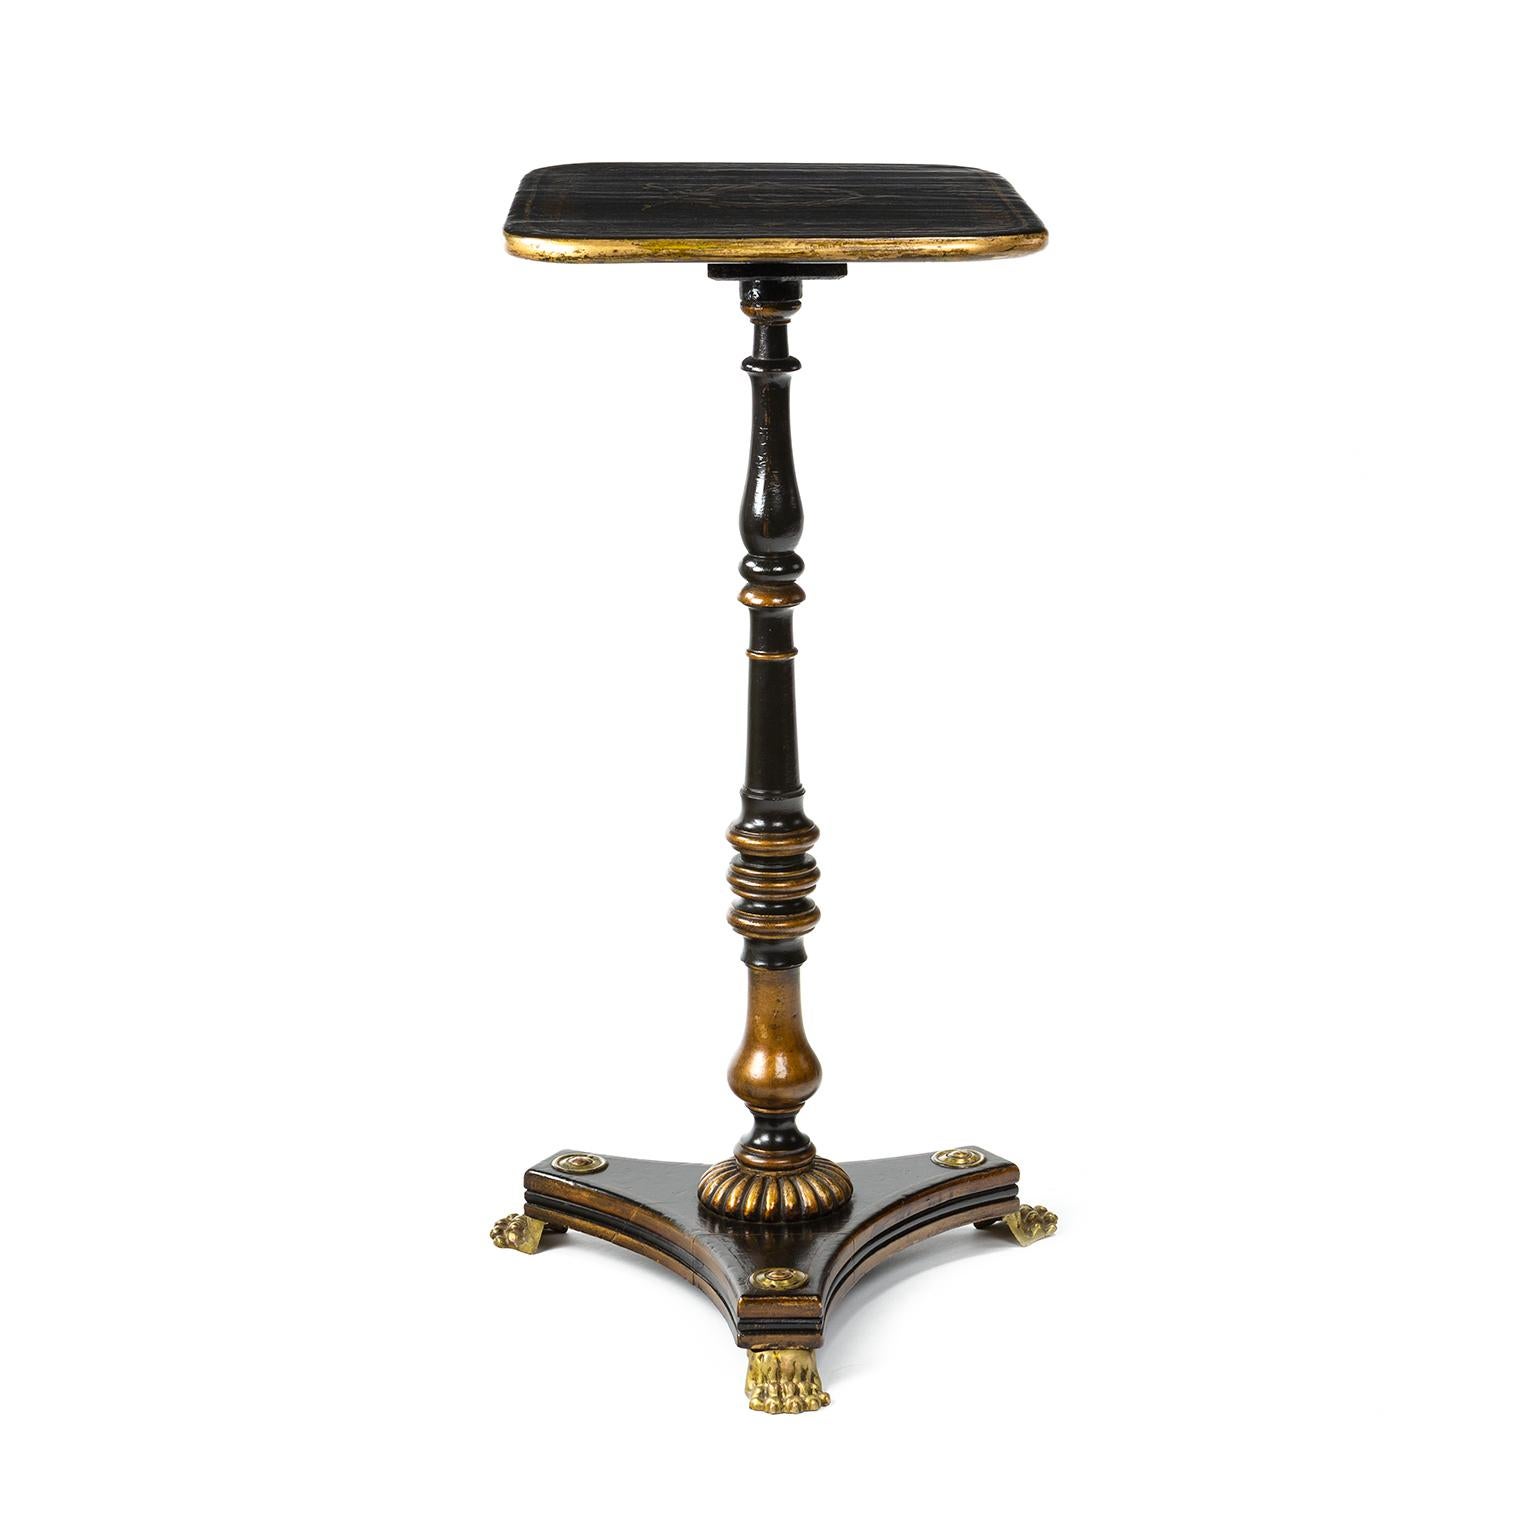 Regency parcel-gilt Japanned and ebonised pedestal occasional or wine table in the Chinoiserie style, complete with brass lion paw feet and large brass bosses to the base. The top is decorated and painted in gold in the typical style of the Regency